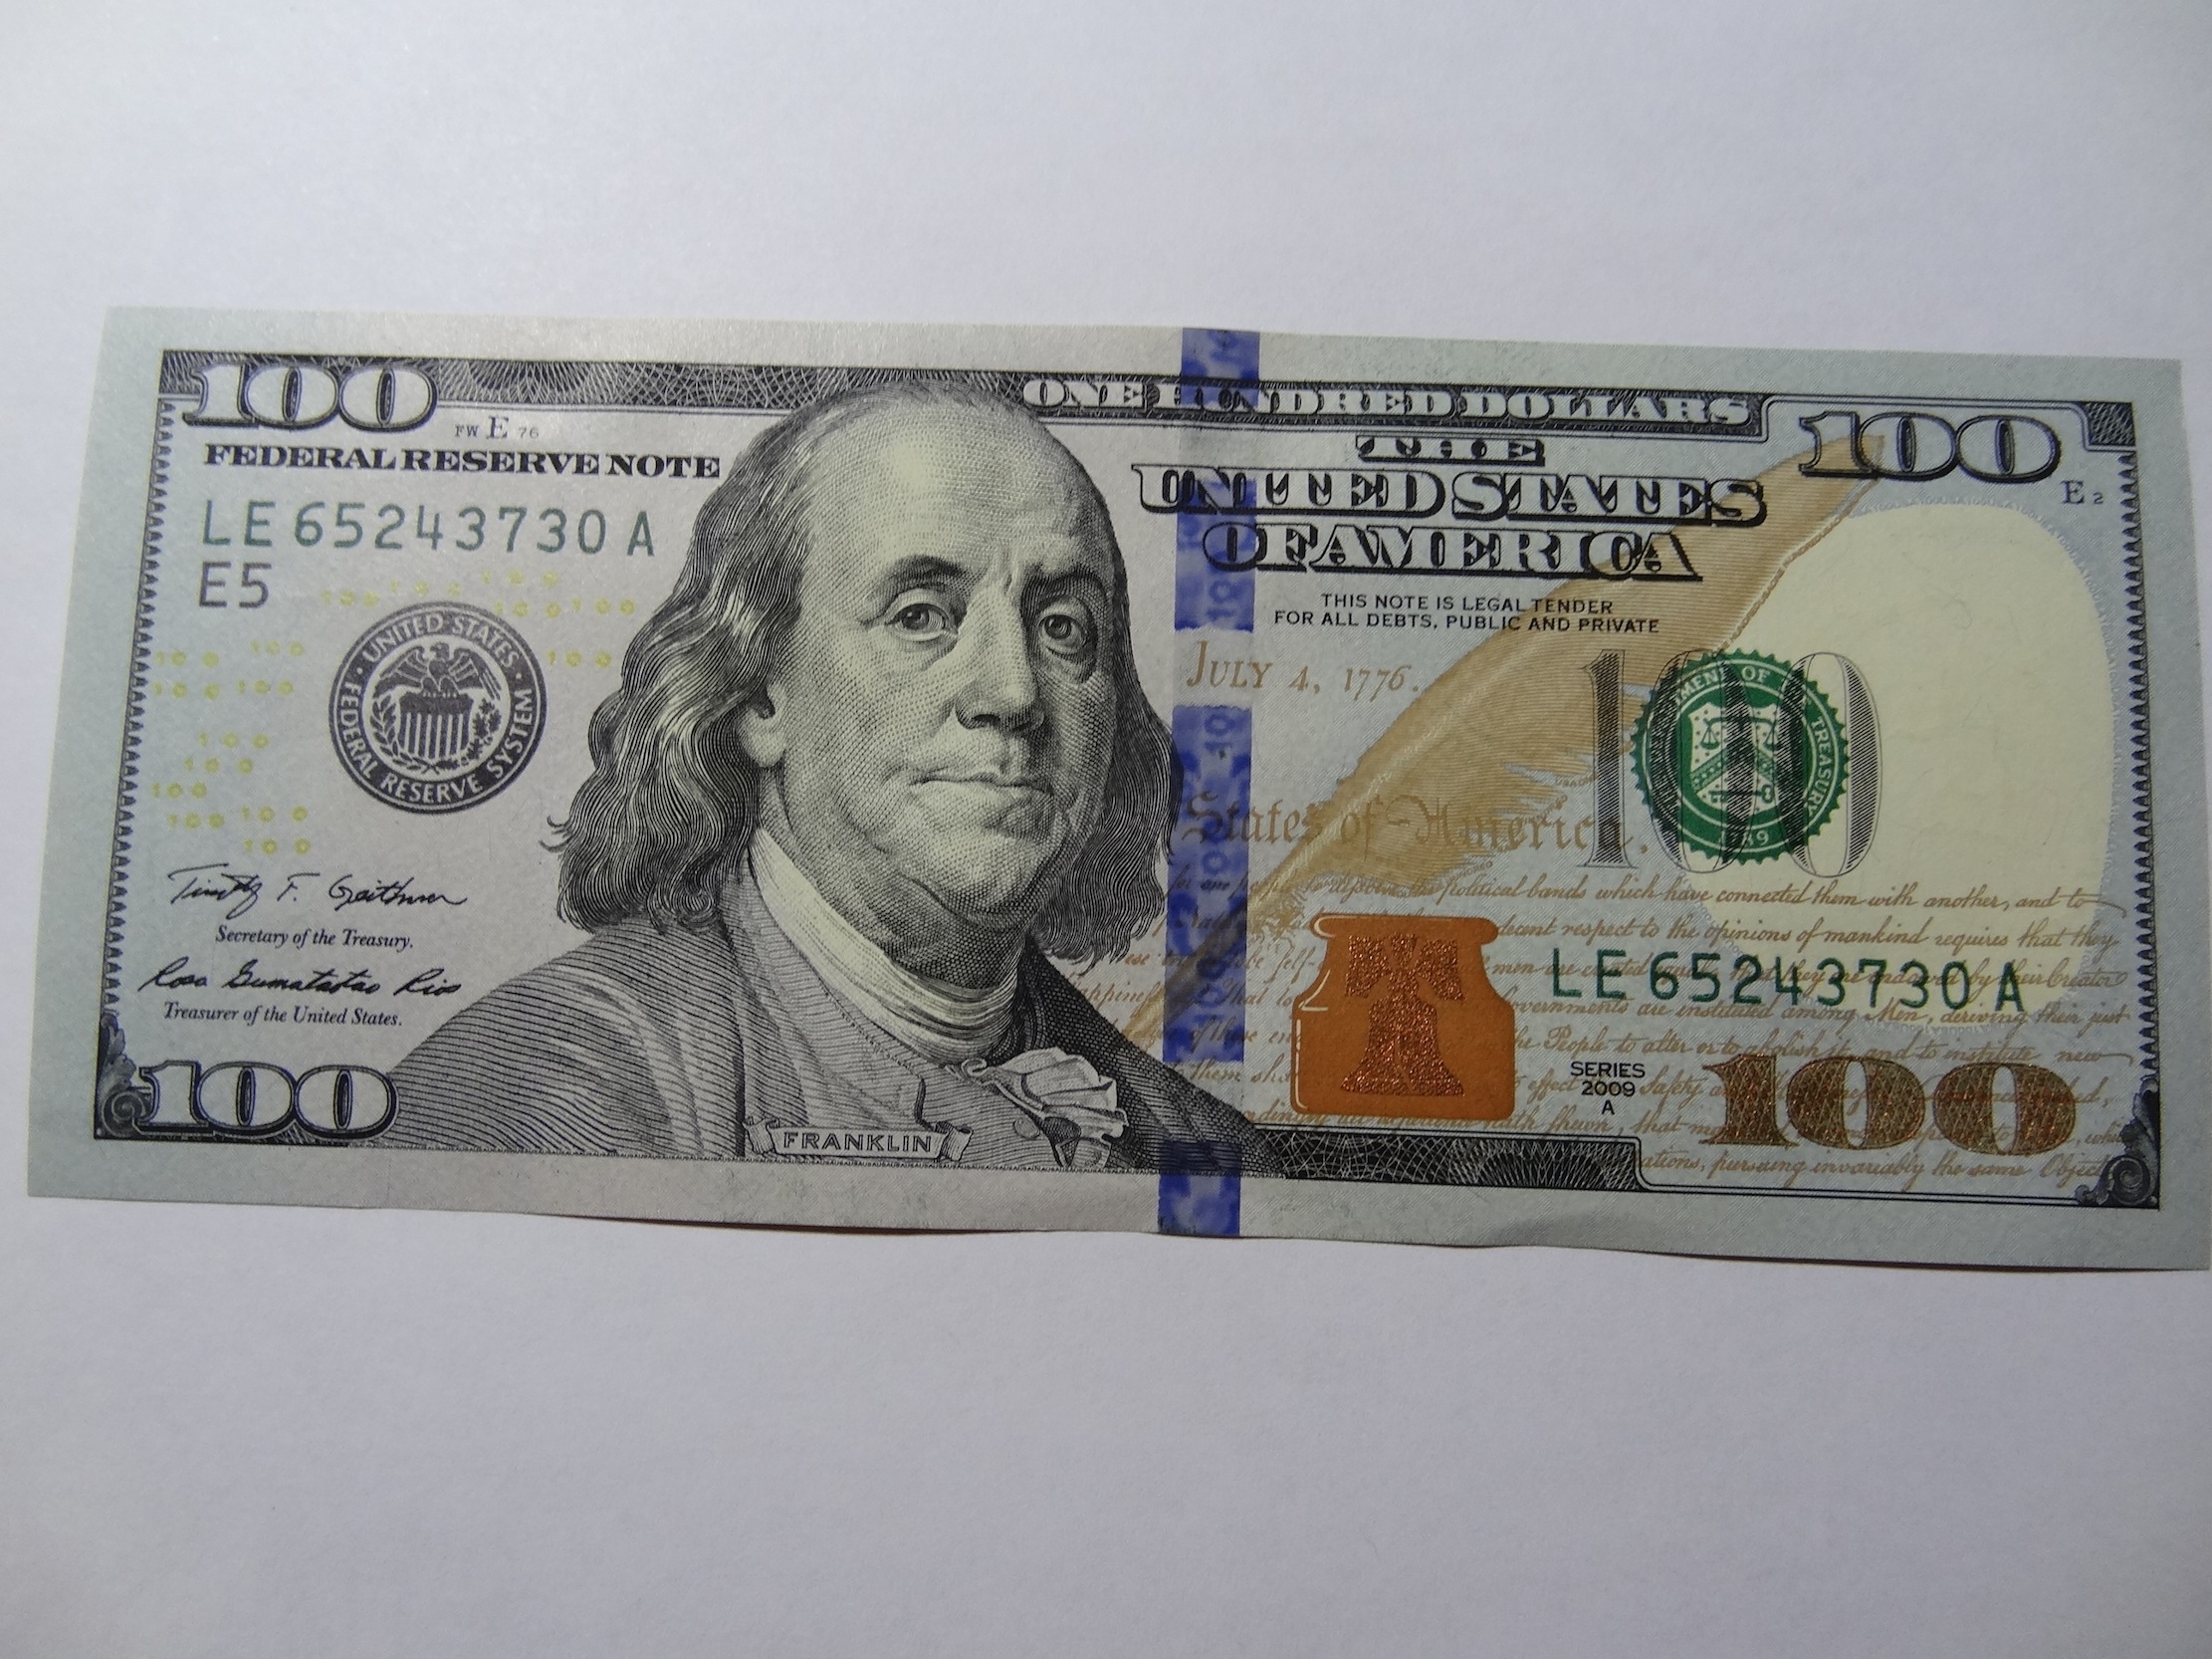 Have You Seen The New $100 Bill?